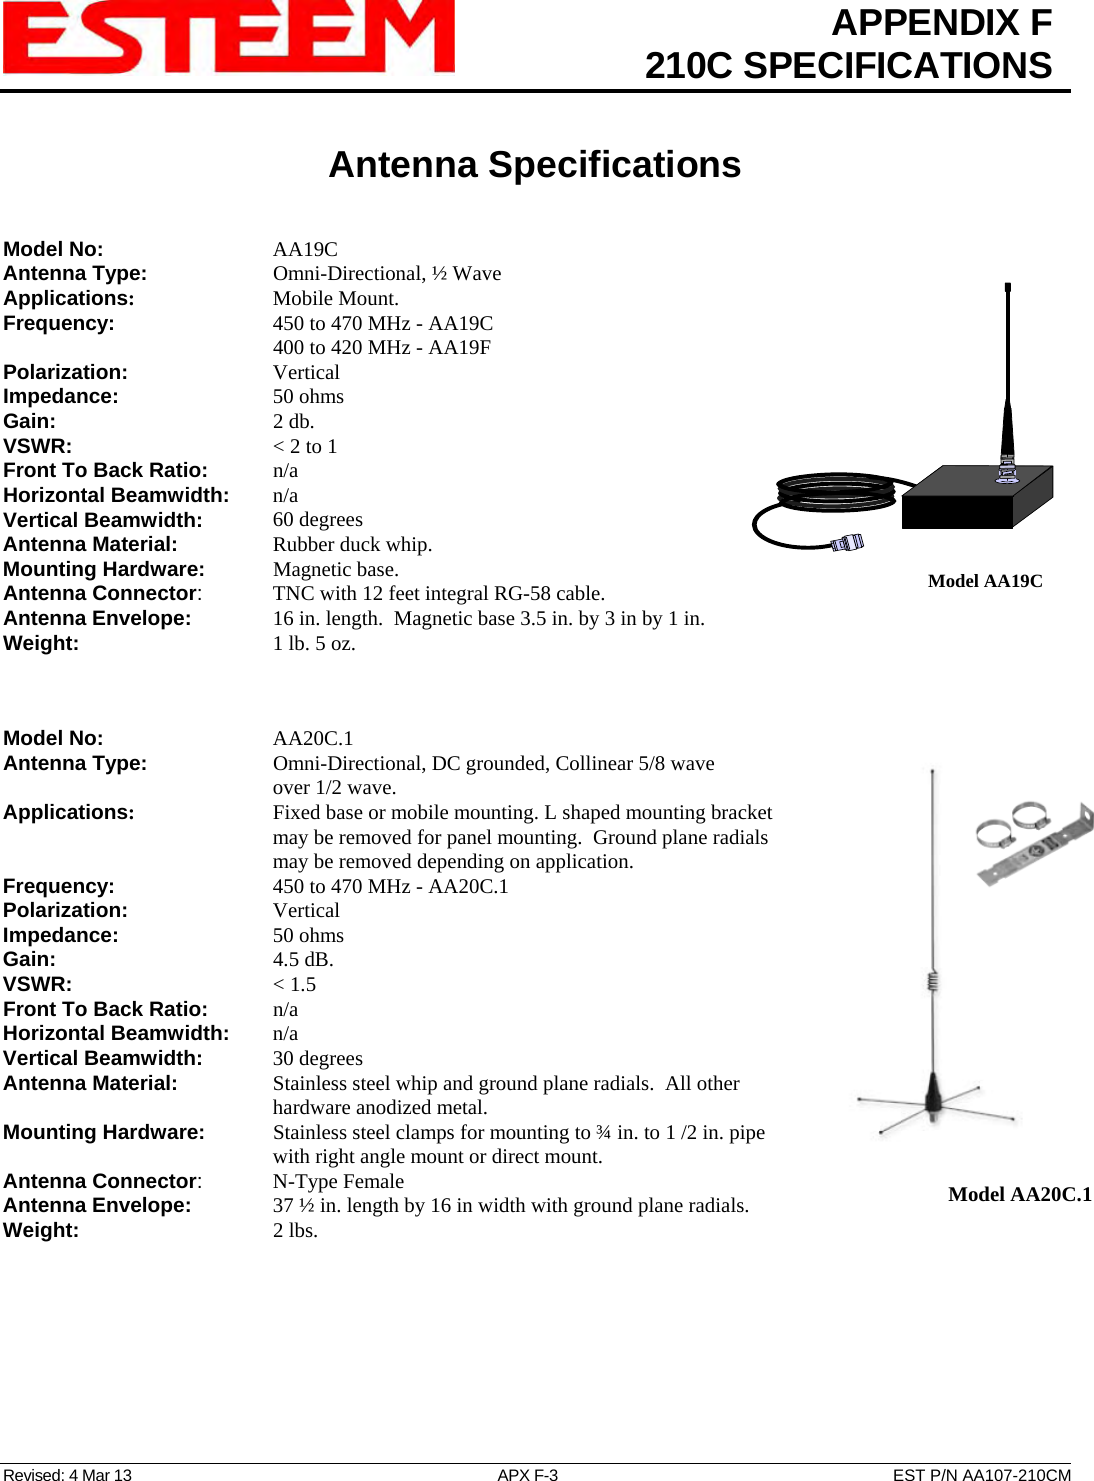  APPENDIX F  210C SPECIFICATIONS   Antenna Specifications   Revised: 4 Mar 13  APX F-3  EST P/N AA107-210CM Model No:    AA19C Antenna Type:   Omni-Directional, ½ Wave  Model AA19CApplications:    Mobile Mount. Frequency:    450 to 470 MHz - AA19C       400 to 420 MHz - AA19F  Polarization:    Vertical Impedance:    50 ohms Gain:     2 db. VSWR:      &lt; 2 to 1  Front To Back Ratio:   n/a Horizontal Beamwidth:  n/a Vertical Beamwidth:     60 degrees Antenna Material:     Rubber duck whip.  Mounting Hardware:      Magnetic base.  Antenna Connector:   TNC with 12 feet integral RG-58 cable. Antenna Envelope:   16 in. length.  Magnetic base 3.5 in. by 3 in by 1 in. Weight:           1 lb. 5 oz.     Model No:    AA20C.1 Antenna Type:   Omni-Directional, DC grounded, Collinear 5/8 wave over 1/2 wave.    Model AA20C.1   Applications:       Fixed base or mobile mounting. L shaped mounting bracket may be removed for panel mounting.  Ground plane radials may be removed depending on application. Frequency:    450 to 470 MHz - AA20C.1 Polarization:    Vertical Impedance:    50 ohms Gain:     4.5 dB. VSWR:      &lt; 1.5  Front To Back Ratio:   n/a Horizontal Beamwidth:  n/a Vertical Beamwidth:     30 degrees Antenna Material:     Stainless steel whip and ground plane radials.  All other hardware anodized metal.  Mounting Hardware:      Stainless steel clamps for mounting to ¾ in. to 1 /2 in. pipe with right angle mount or direct mount.  Antenna Connector:   N-Type Female Antenna Envelope:   37 ½ in. length by 16 in width with ground plane radials. Weight:       2 lbs. 